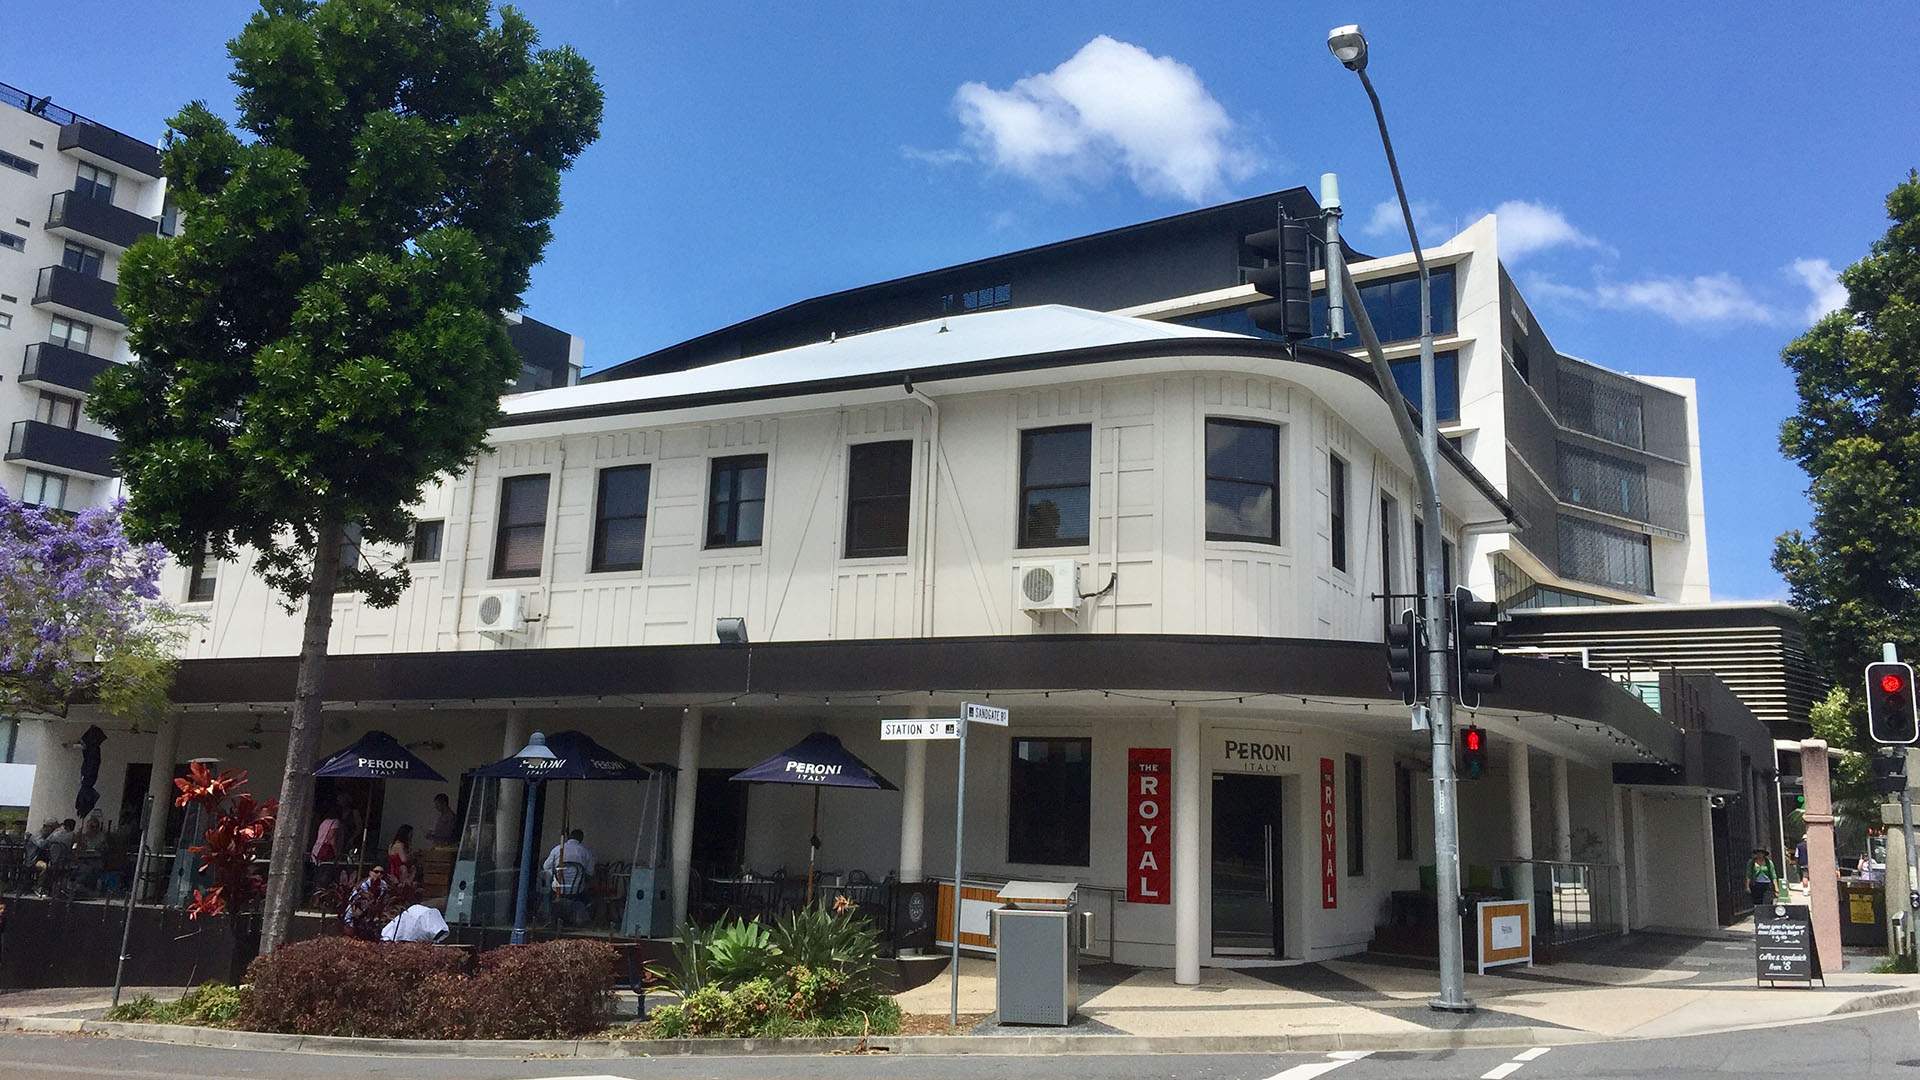 Nundah's 135-Year-Old The Royal Is the Latest Historic Brisbane Pub That's Getting a Hefty Revamp